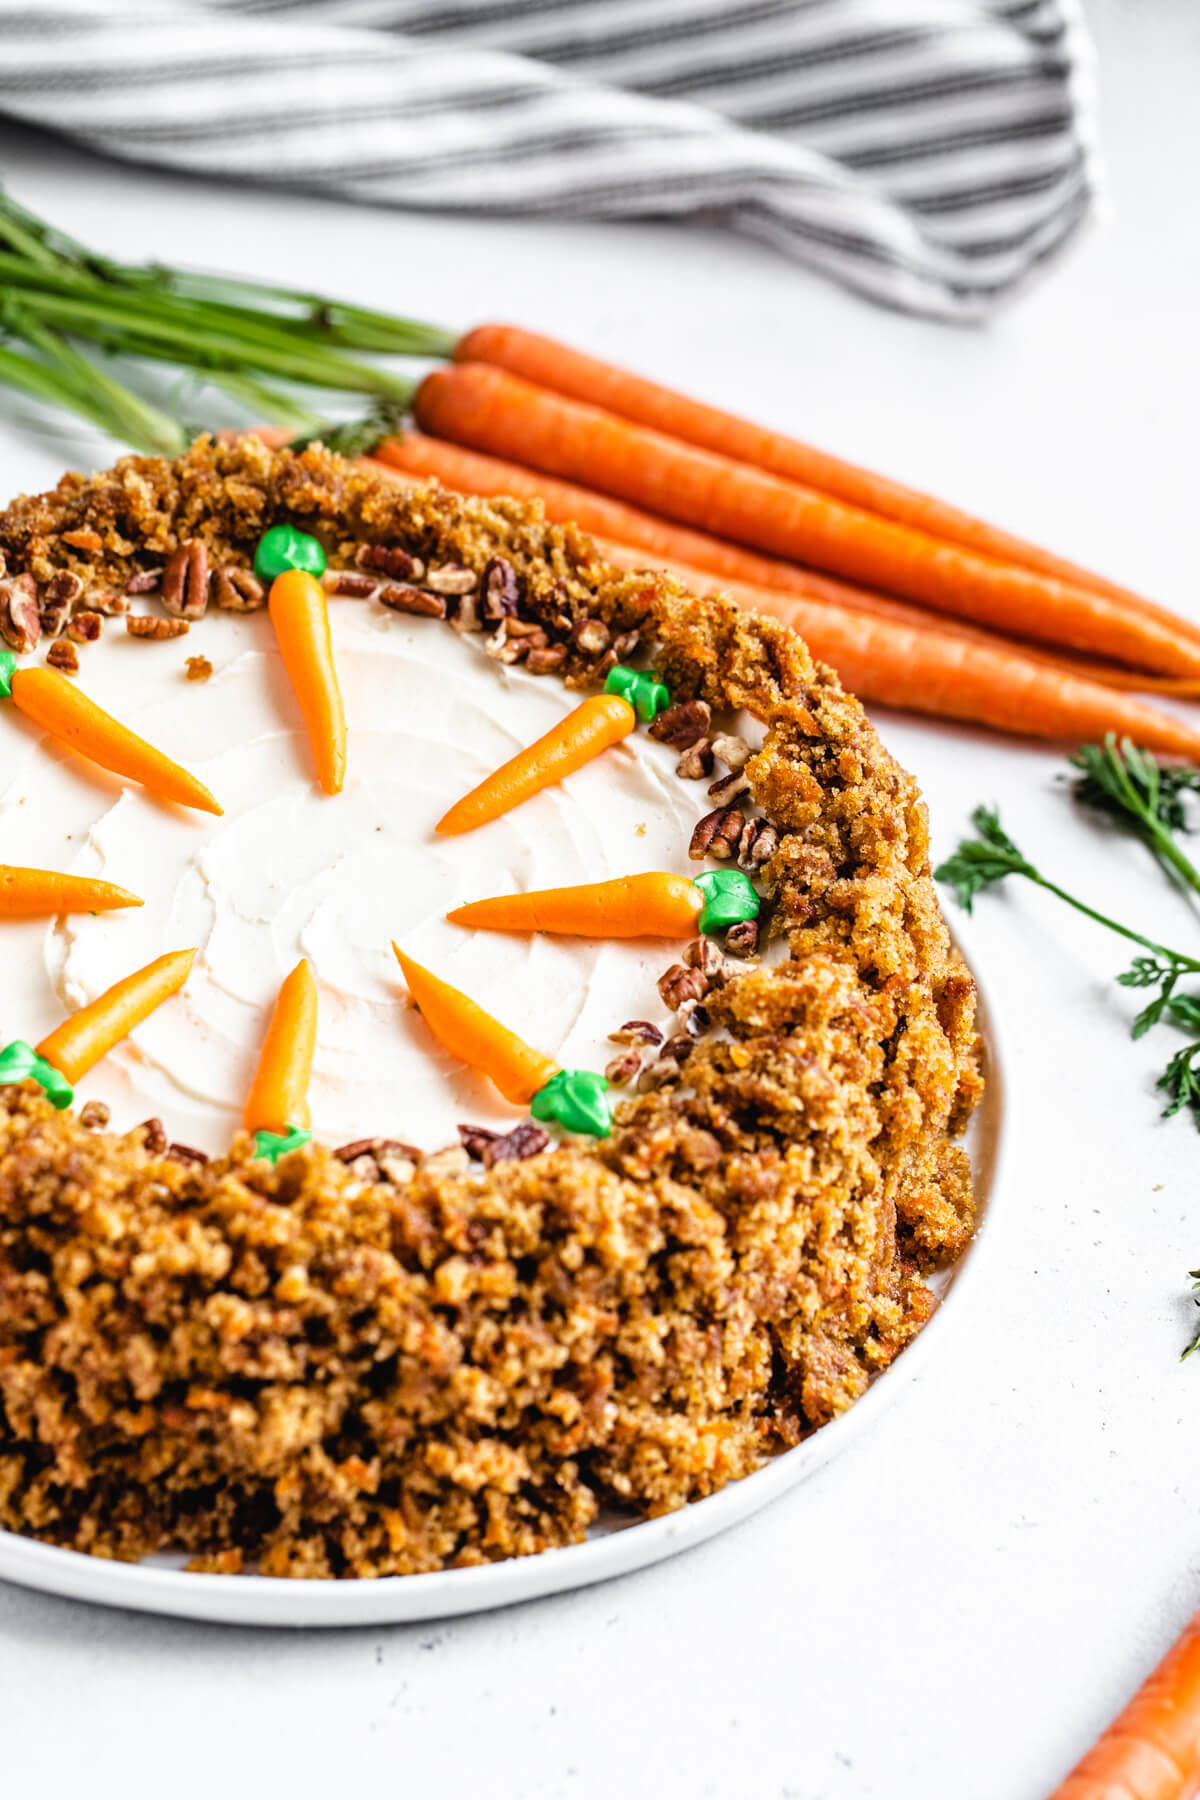 cheesecake on a white plate with carrots in the background